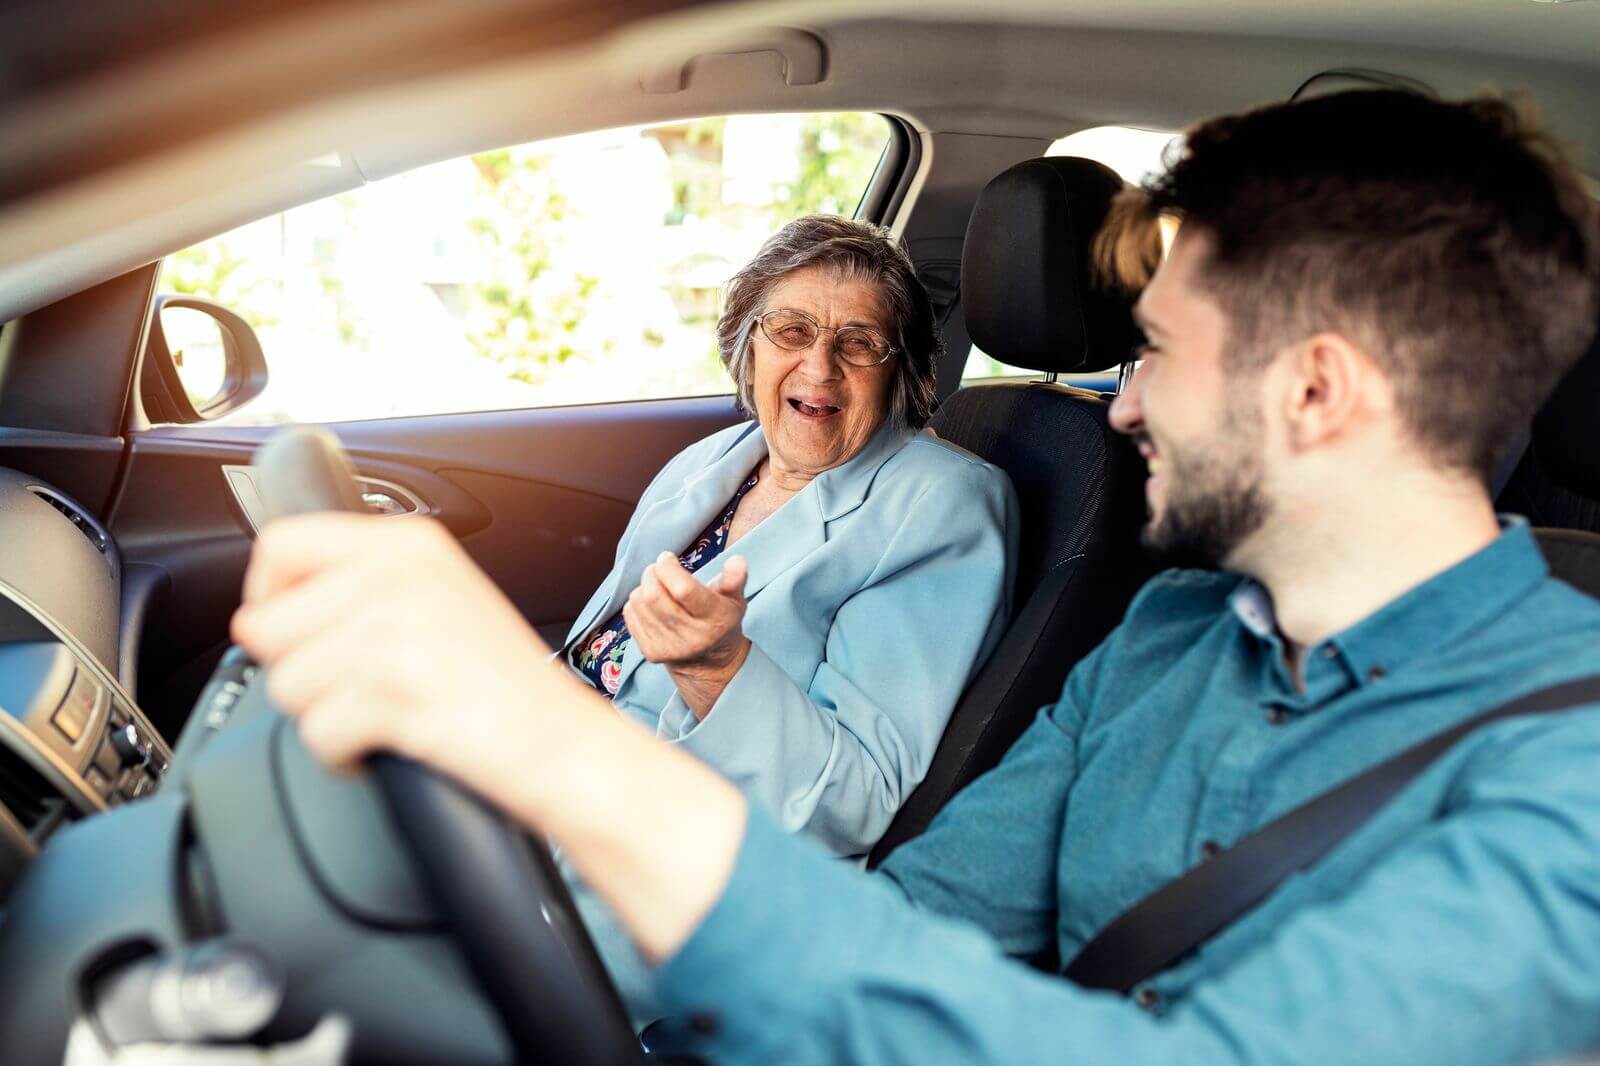 https://cdn.elderlifefinancial.com/wp-content/uploads/2024/01/Traveling-by-Car-7-Comfort-and-Safety-Tips-for-Seniors.jpg?strip=all&lossy=1&ssl=1